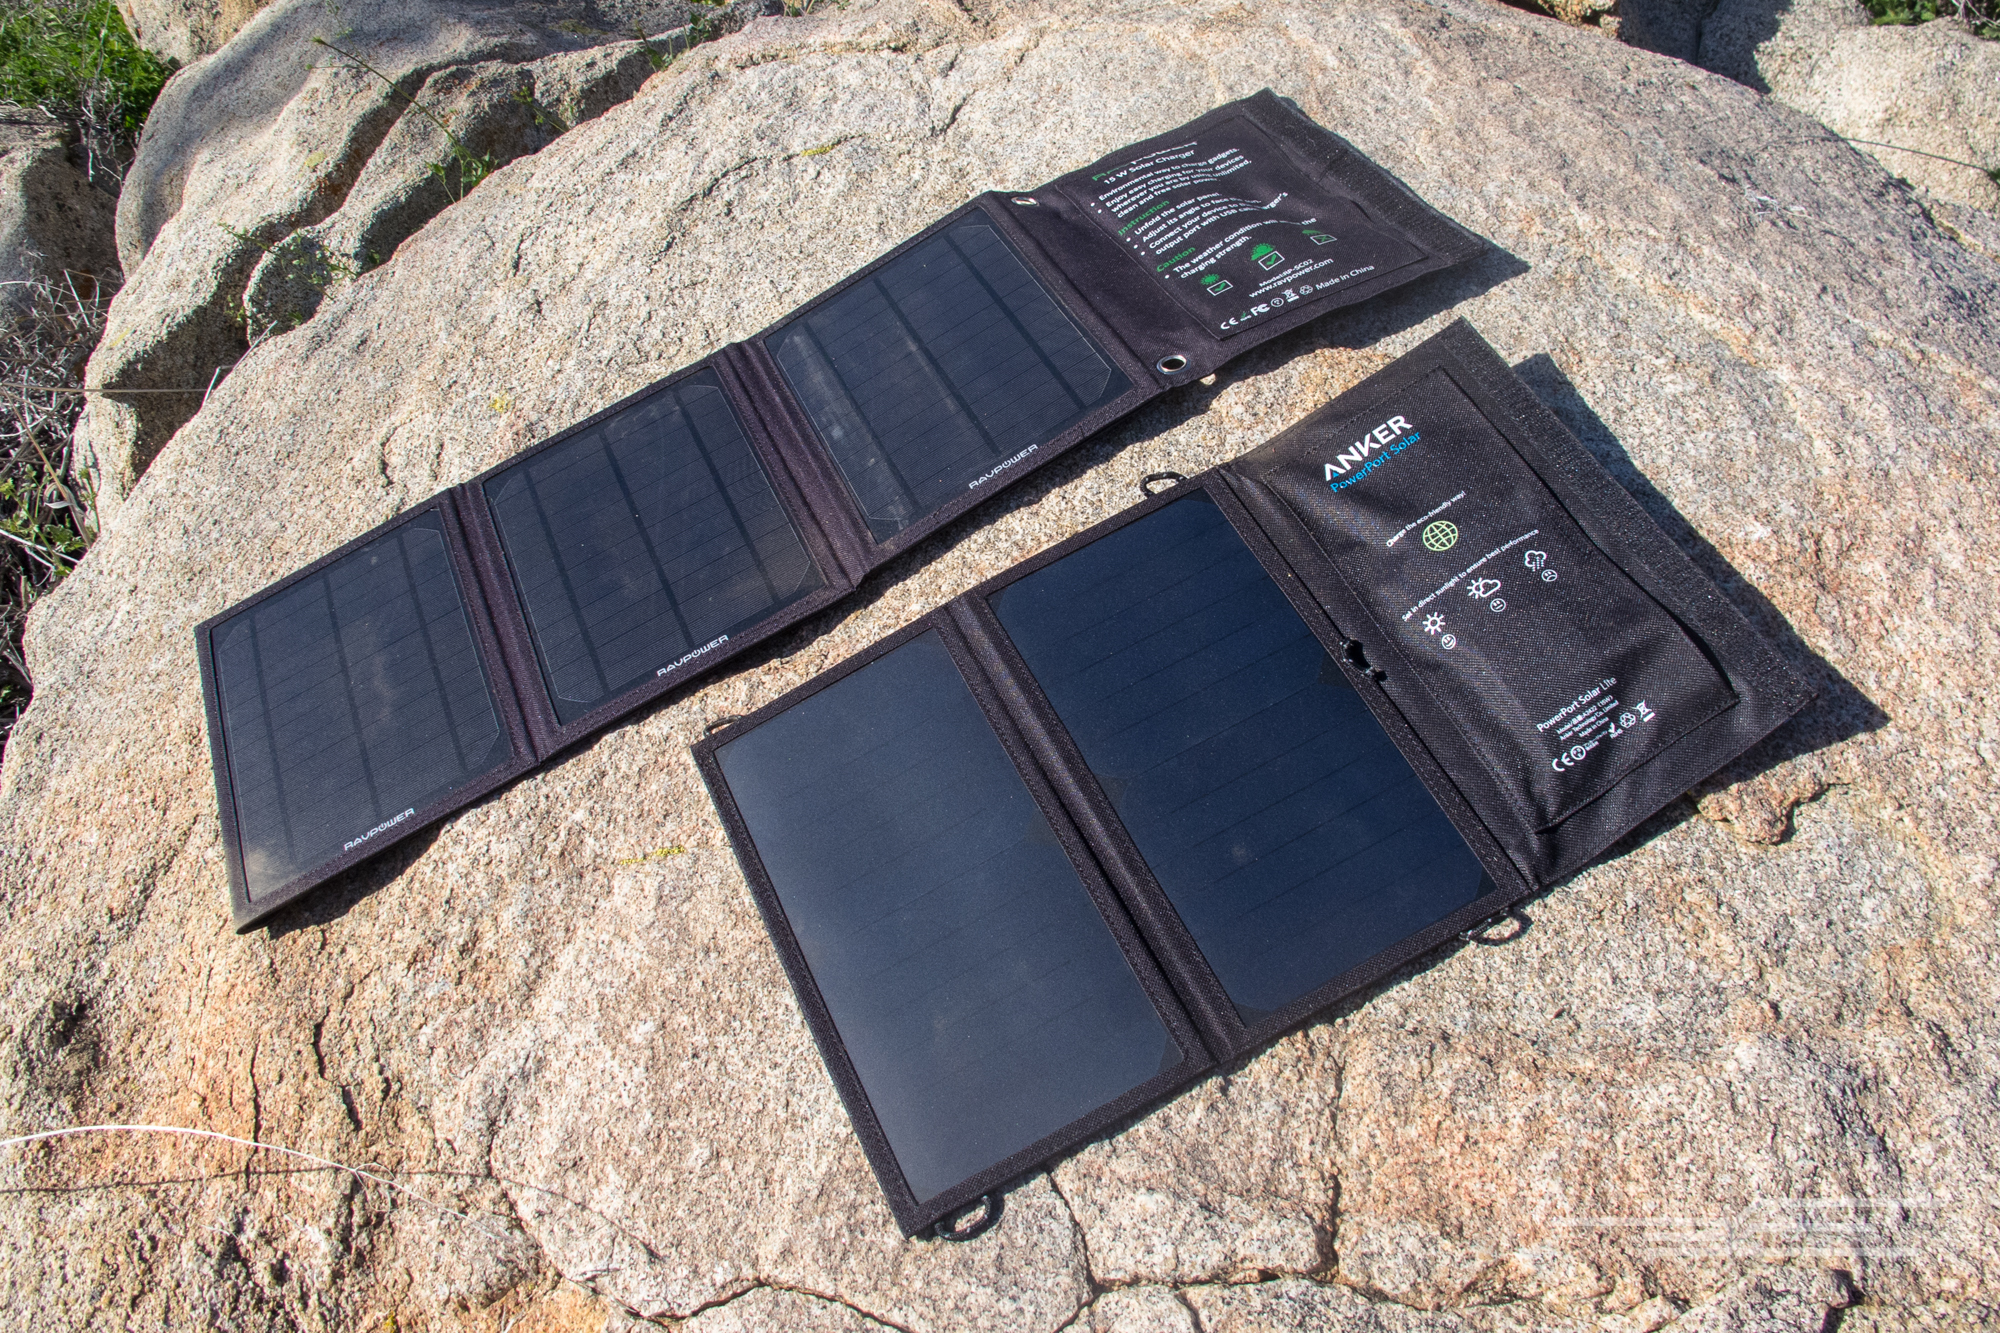 The best portable solar battery charger